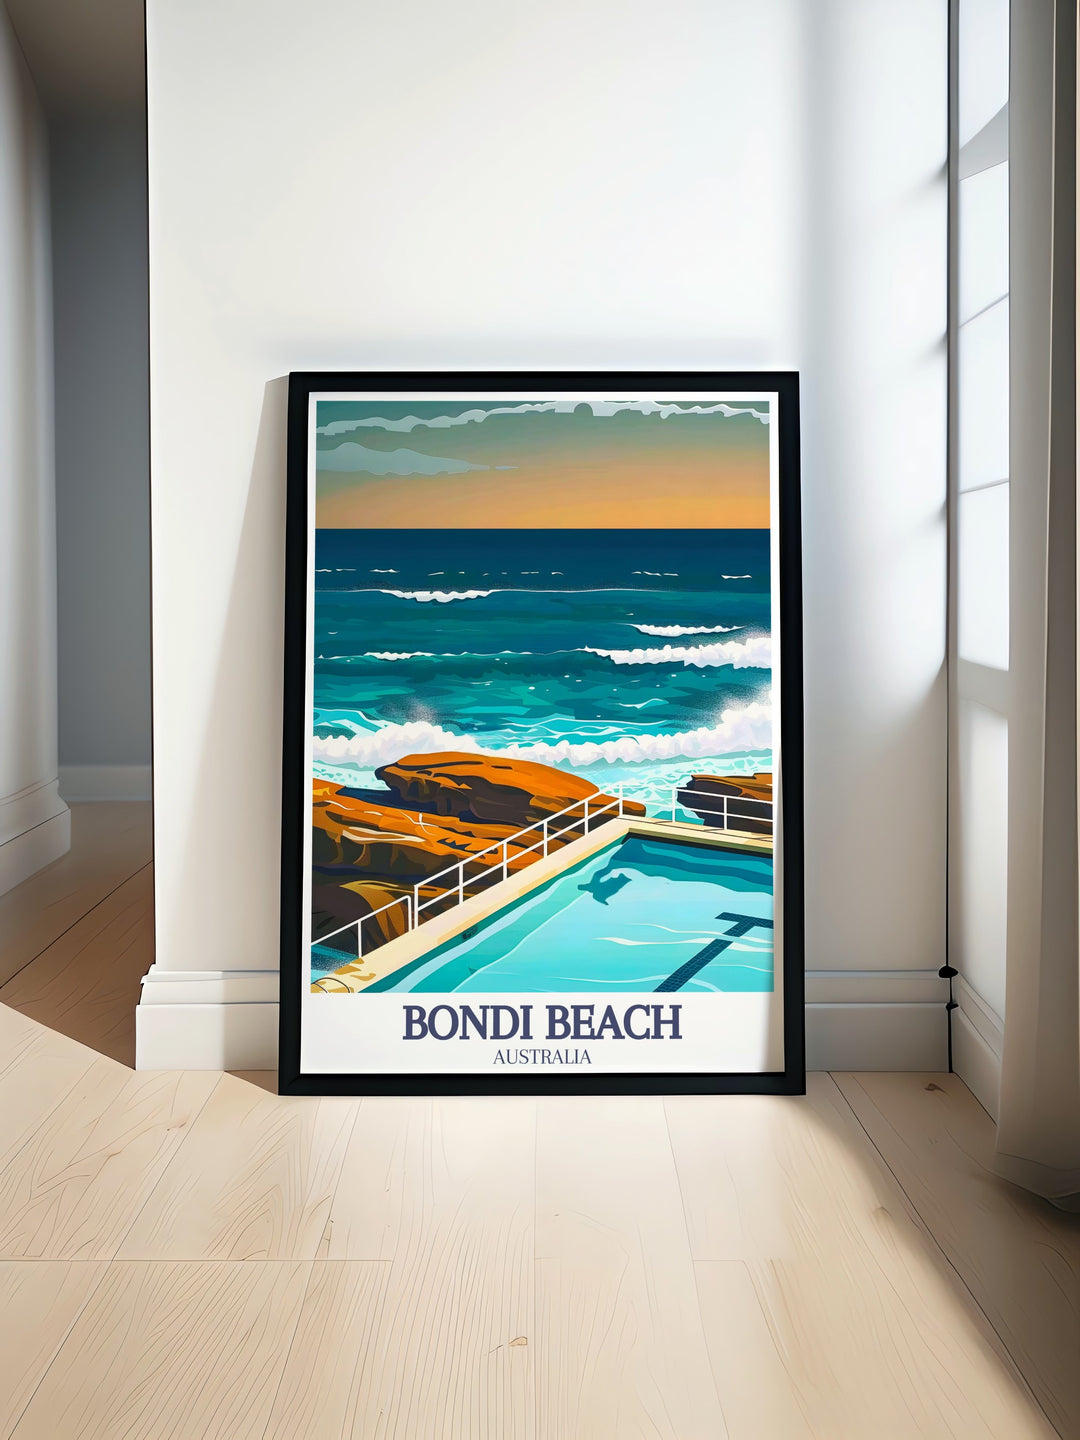 Vintage poster of Sydney Harbour featuring the iconic Sydney Opera House and Harbour Bridge. Bondi Icebergs pool Bondi digital print showcasing the vibrant beach scene. Perfect for home decor, retro travel enthusiasts, and art collectors looking for stunning Australia art.